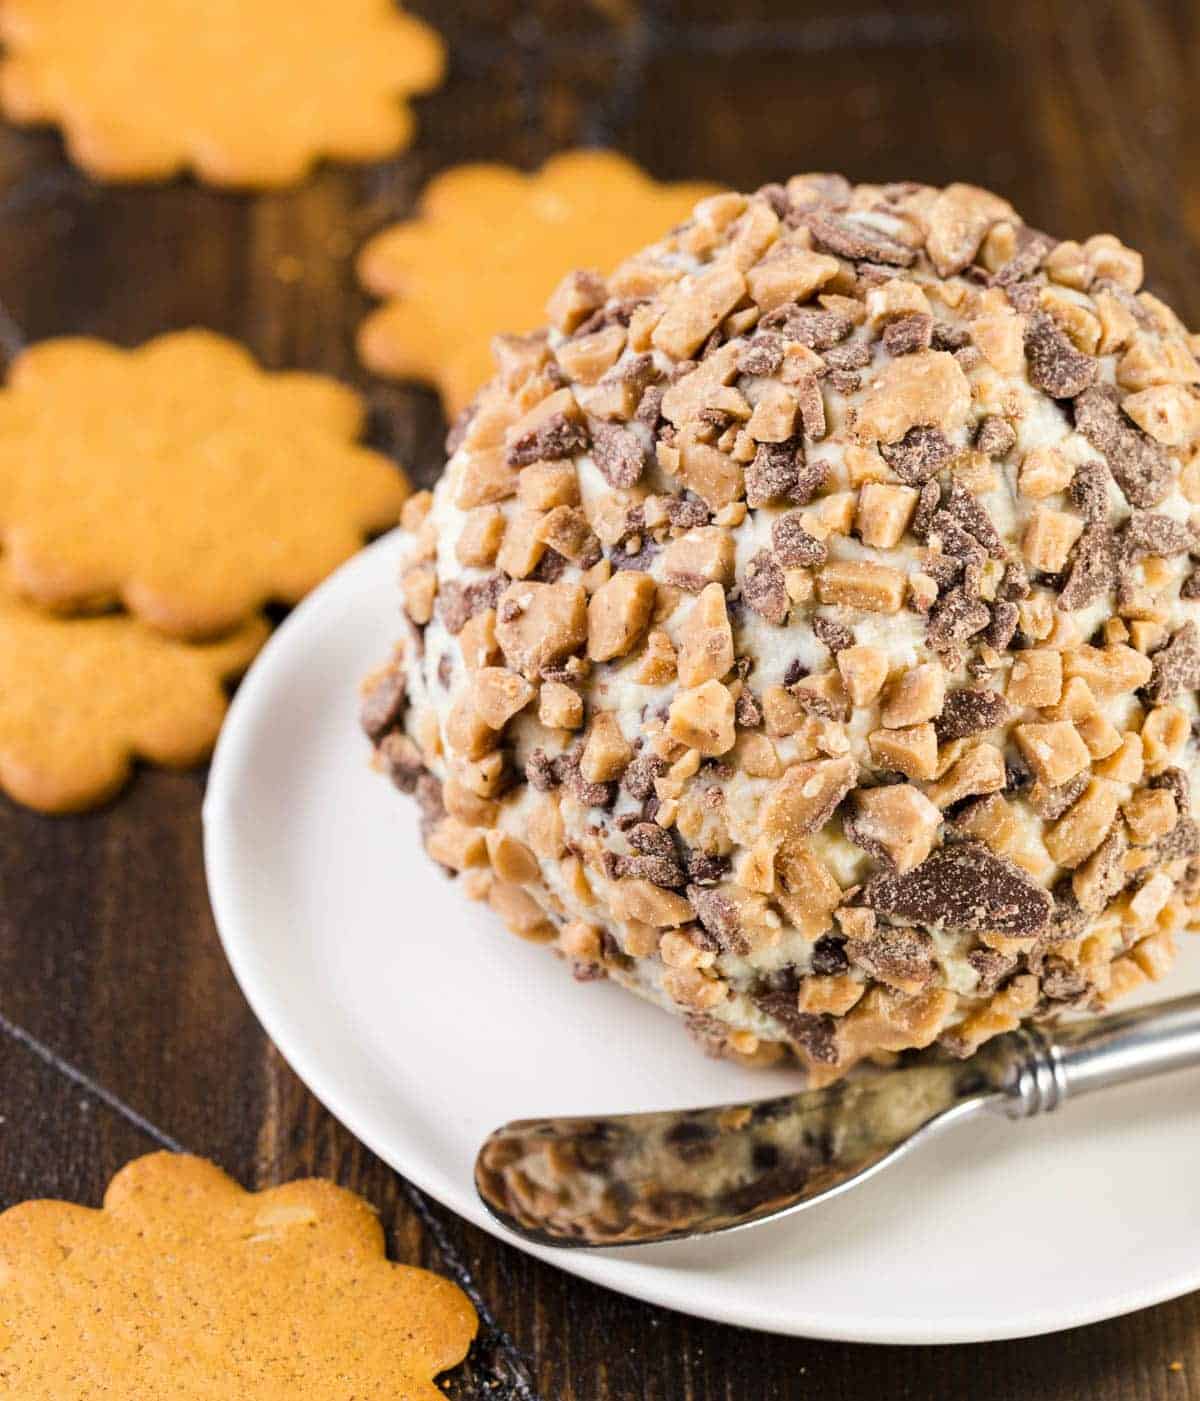 The Chocolate Chip Cheeseball is plated on the middle of a circular plate